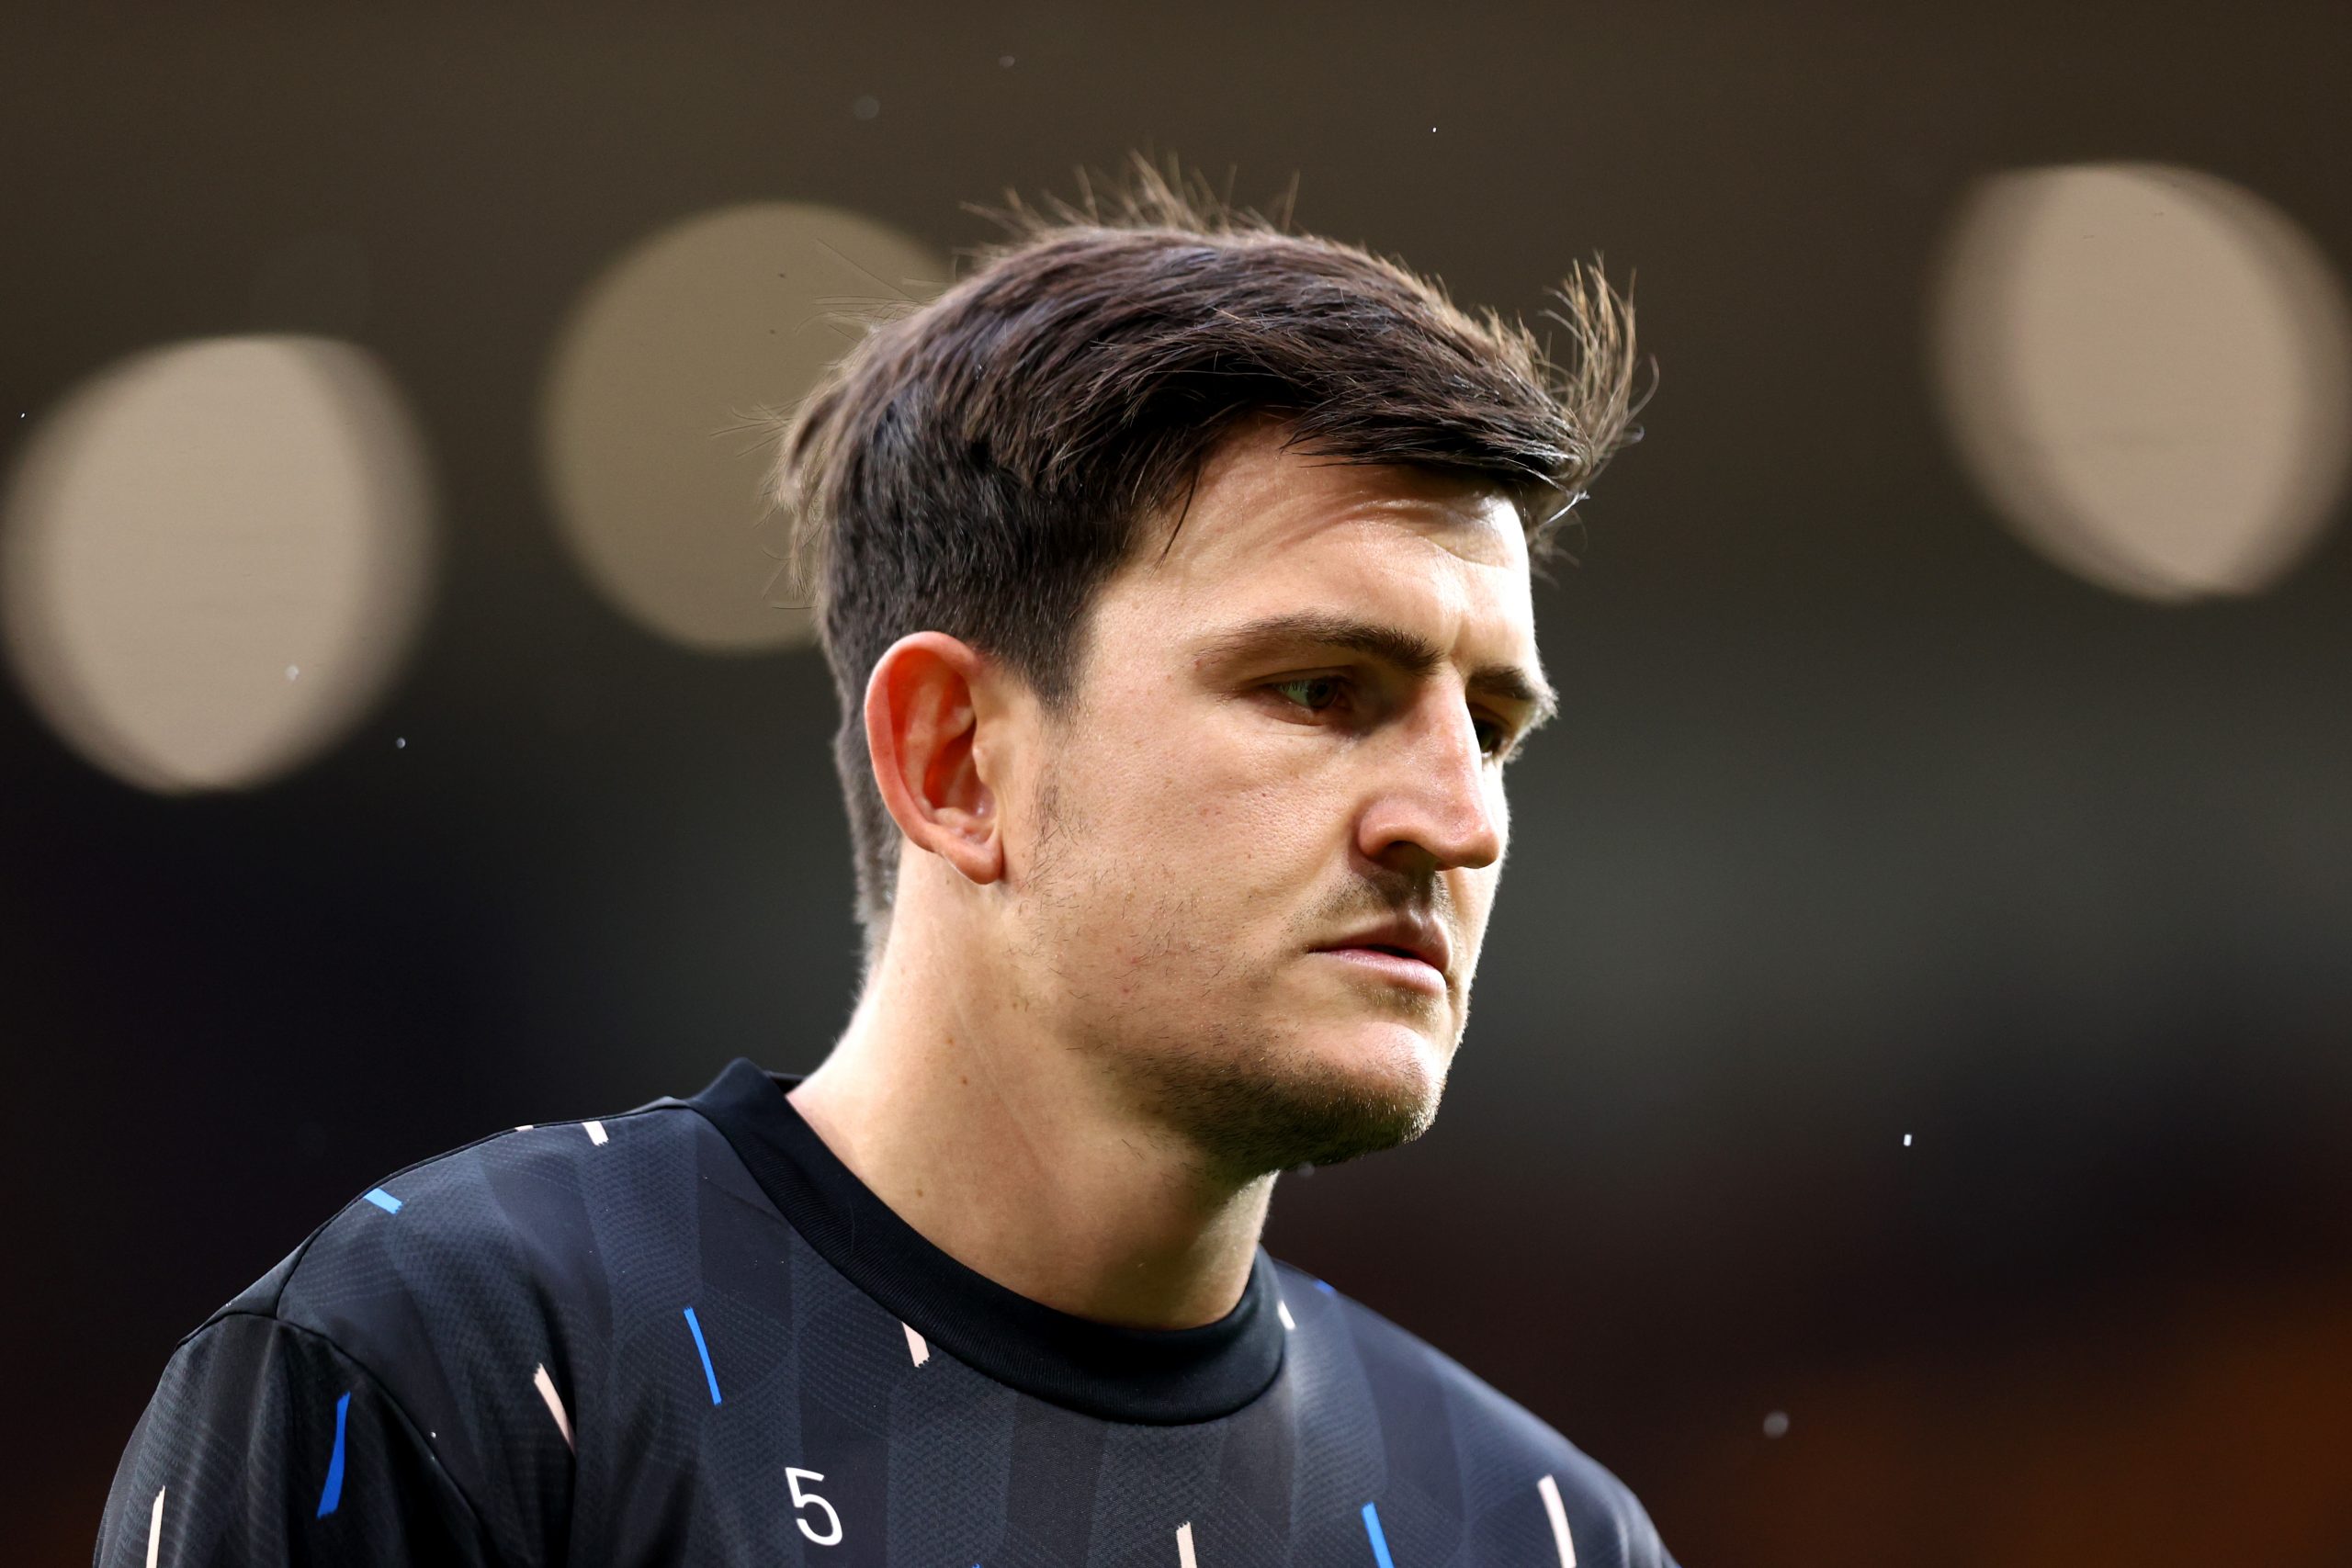 Harry Maguire of Manchester United is currently the club captain but not trusted by Erik ten Hag.